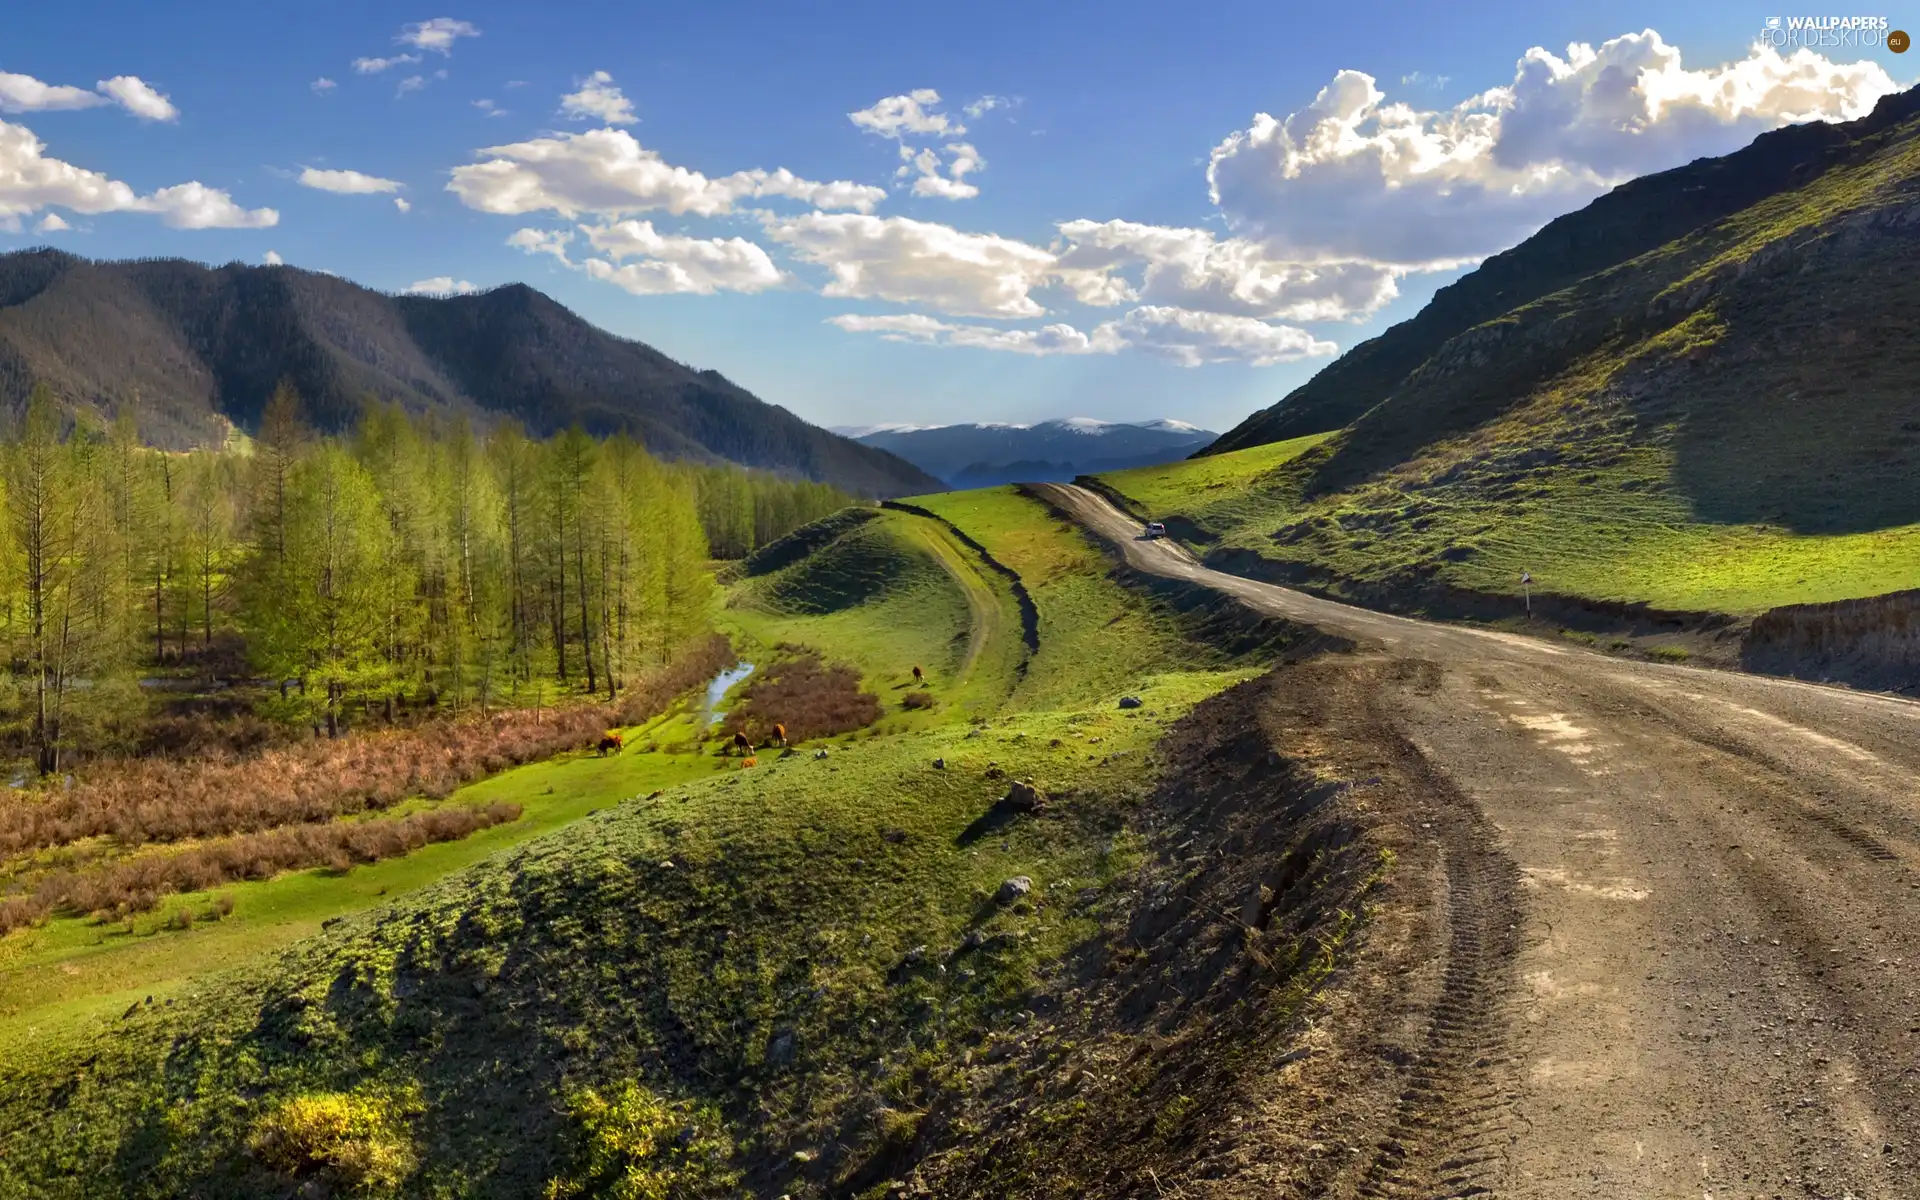 trees, viewes, car in the meadow, Way, Mountains